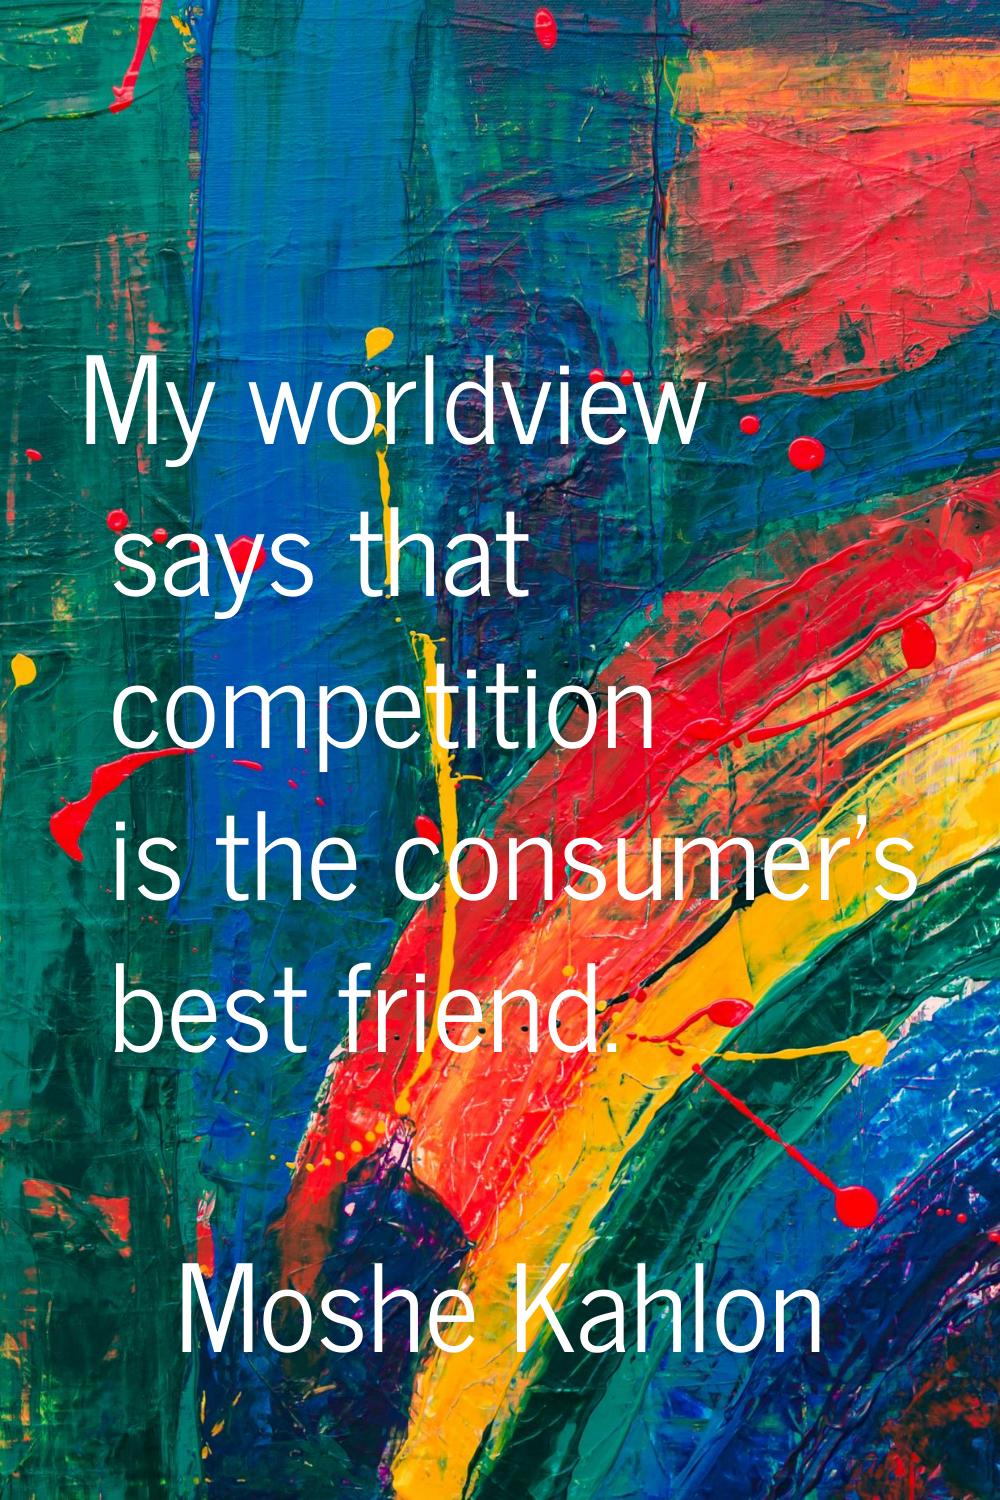 My worldview says that competition is the consumer's best friend.